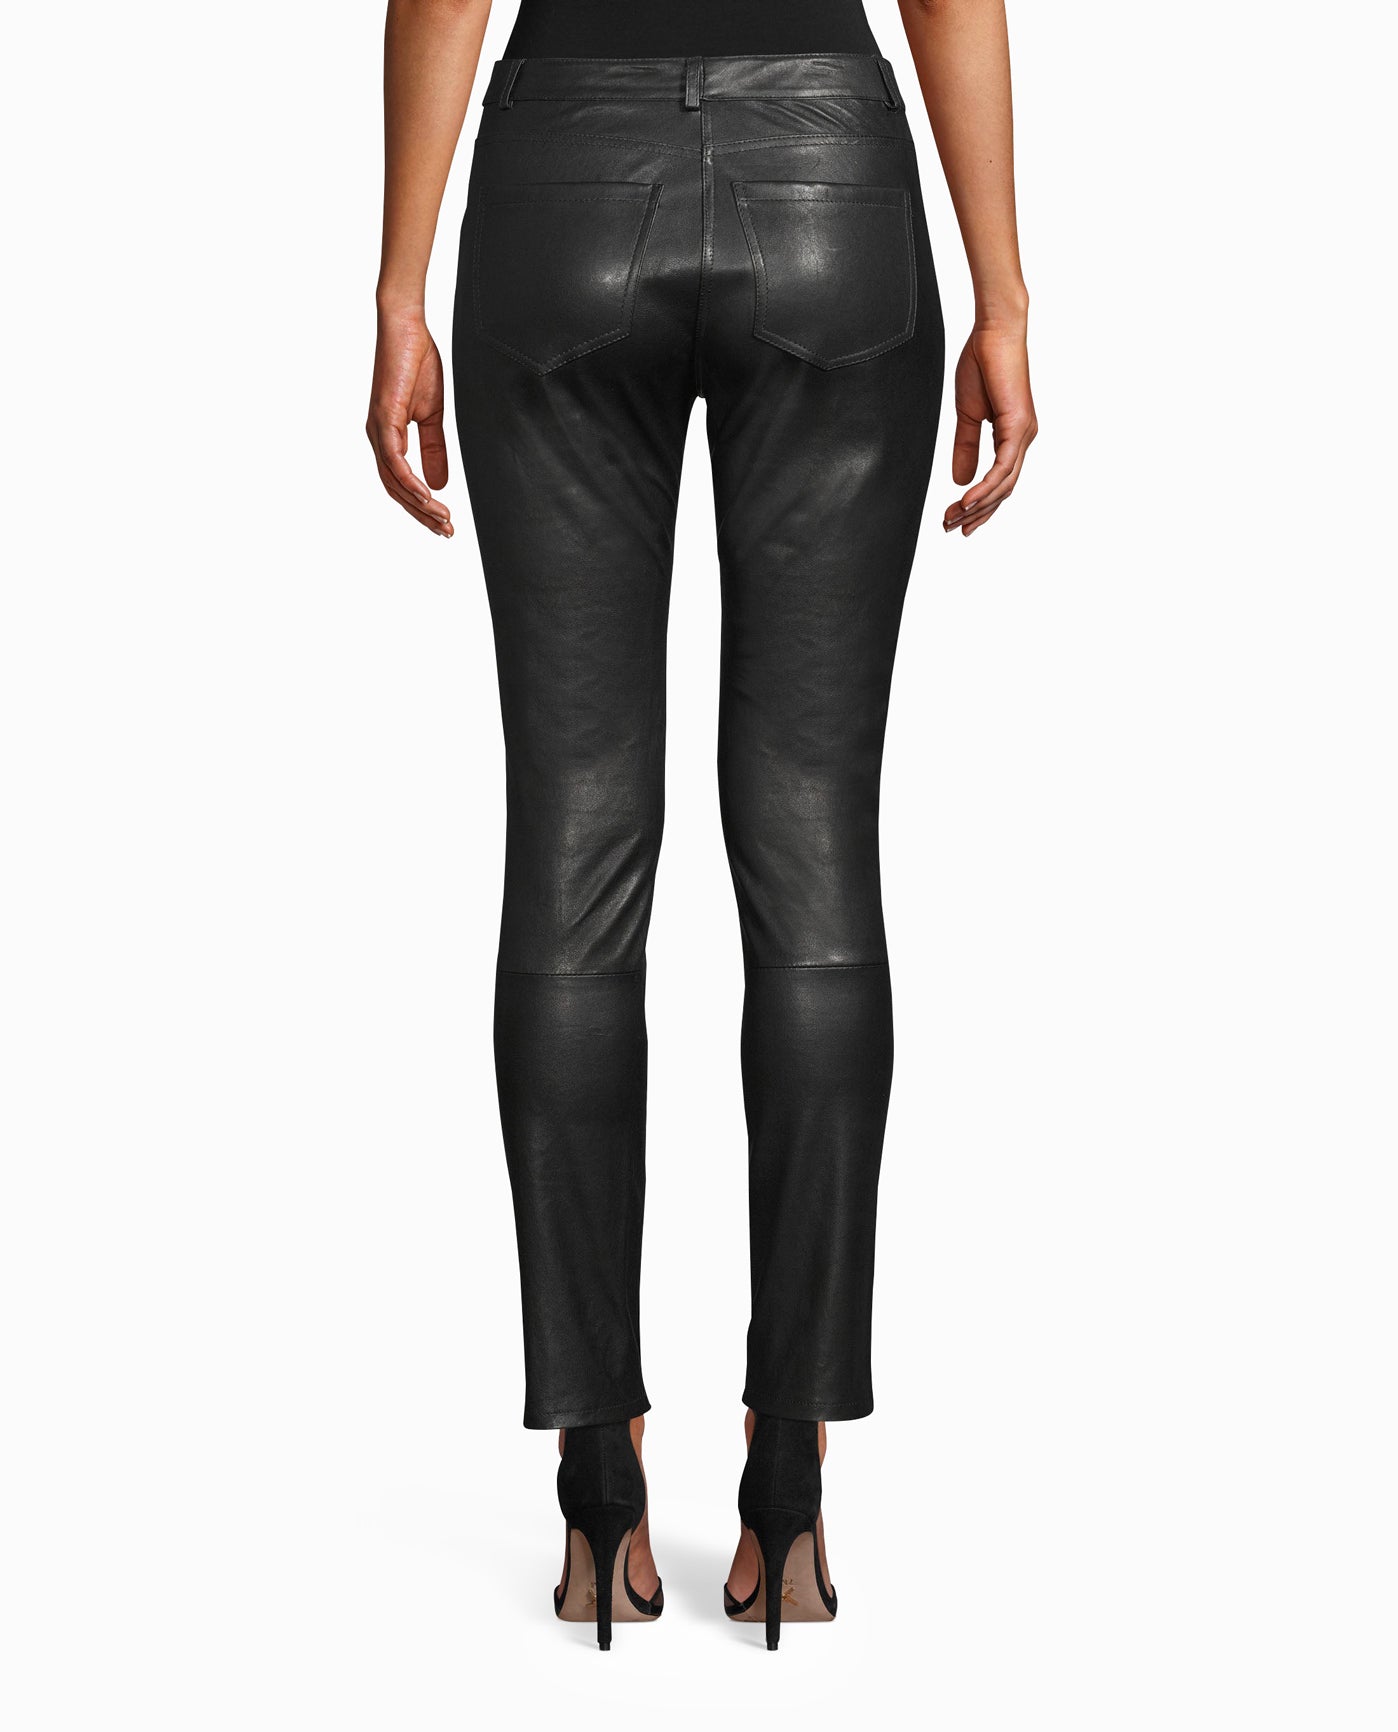 black leather pants - Buy black leather pants product on